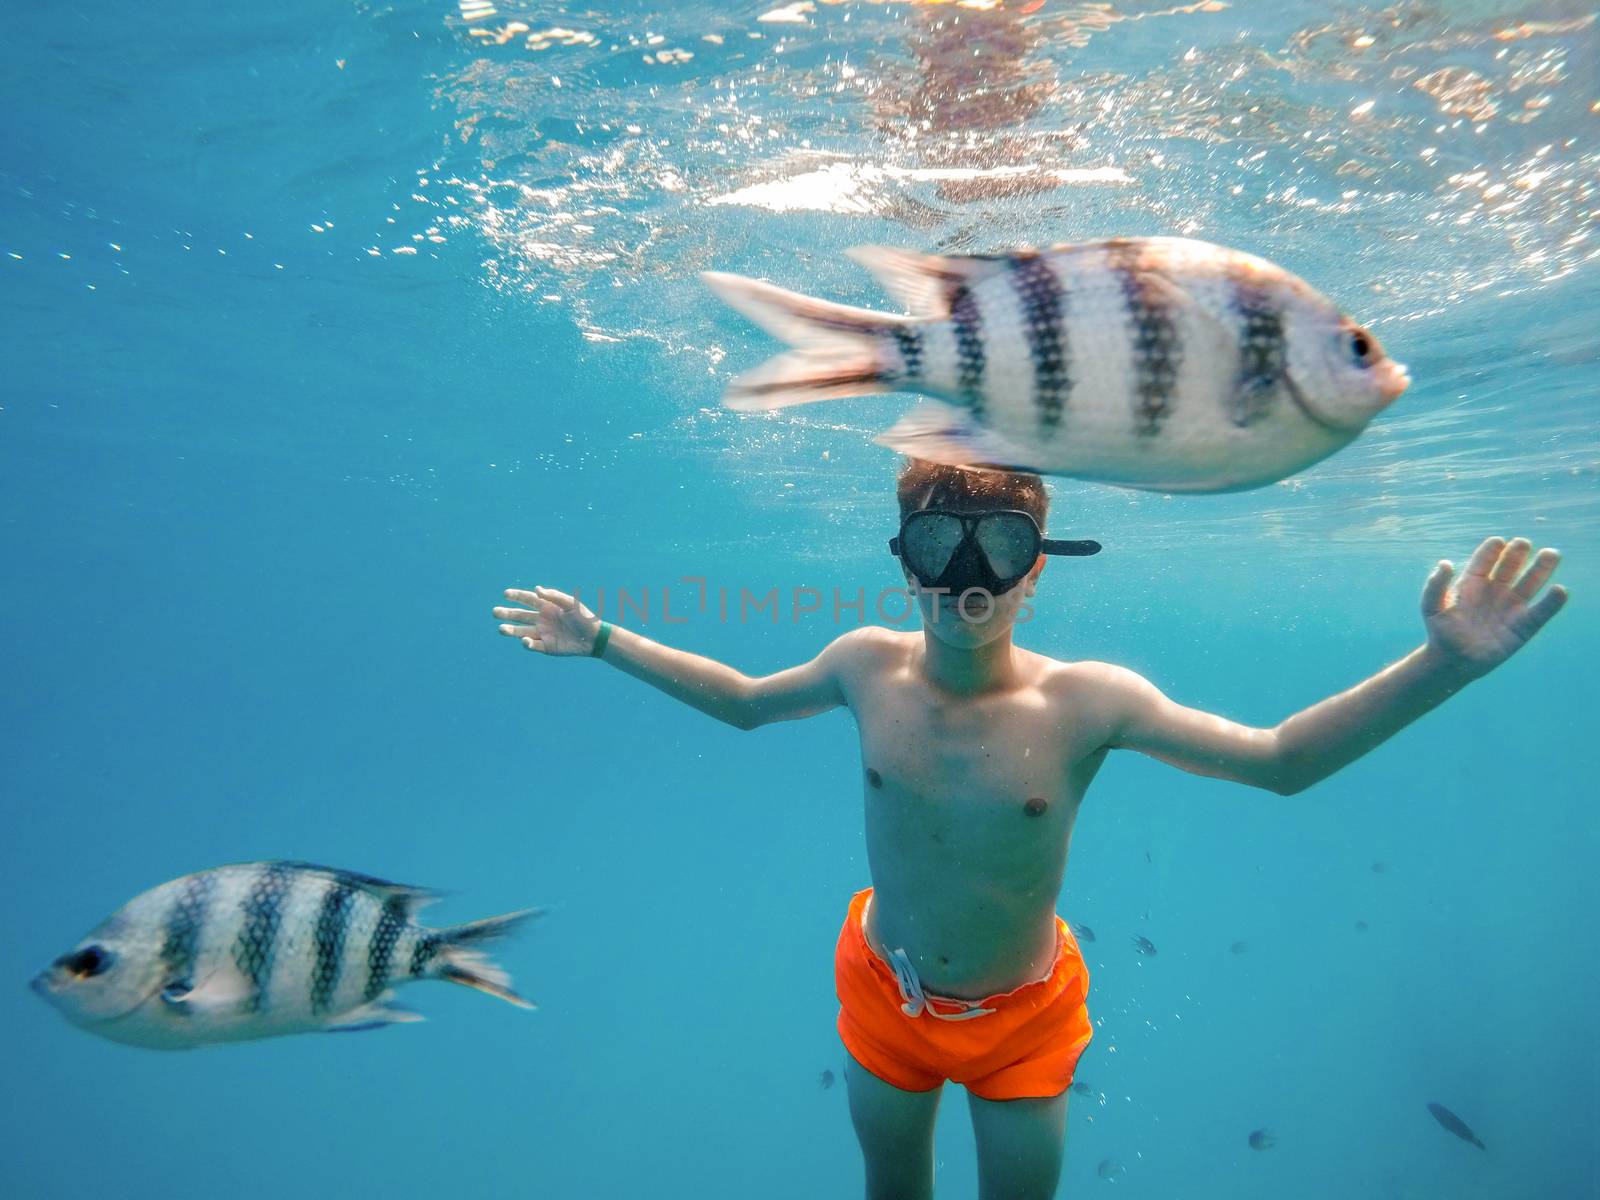 Young boy snorkel swim in underwater exotic tropics paradise with fish. Marsa alam, Egypt. Summer holiday vacation concept